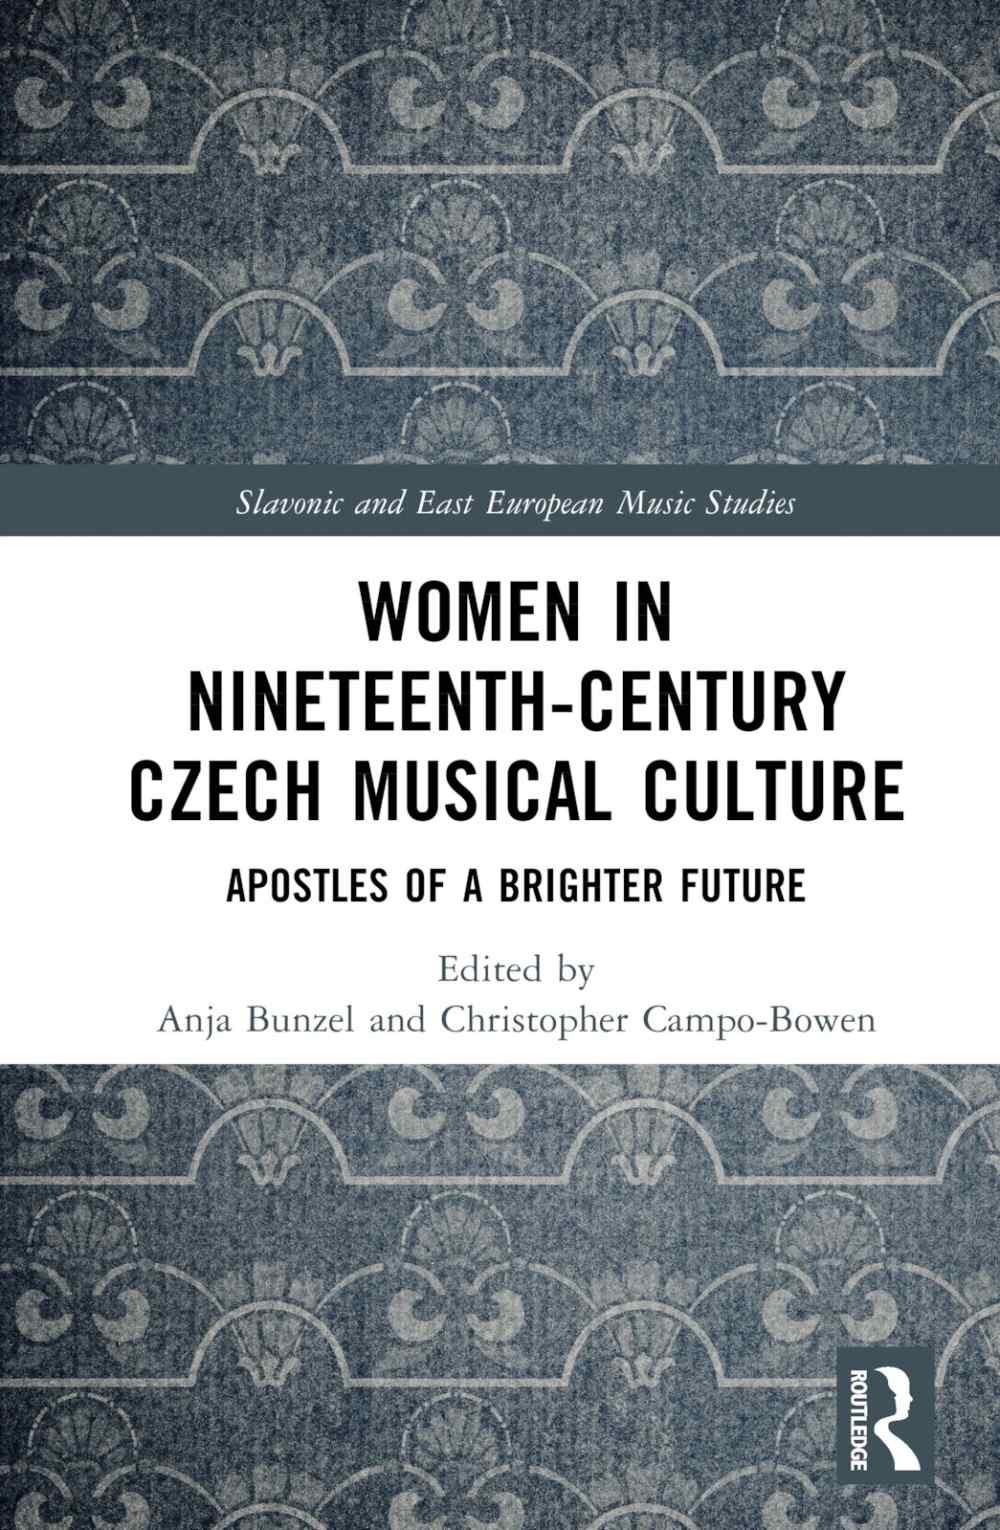 Women in Nineteenth-Century Czech Musical Culture: Apostles of a Brighter Future